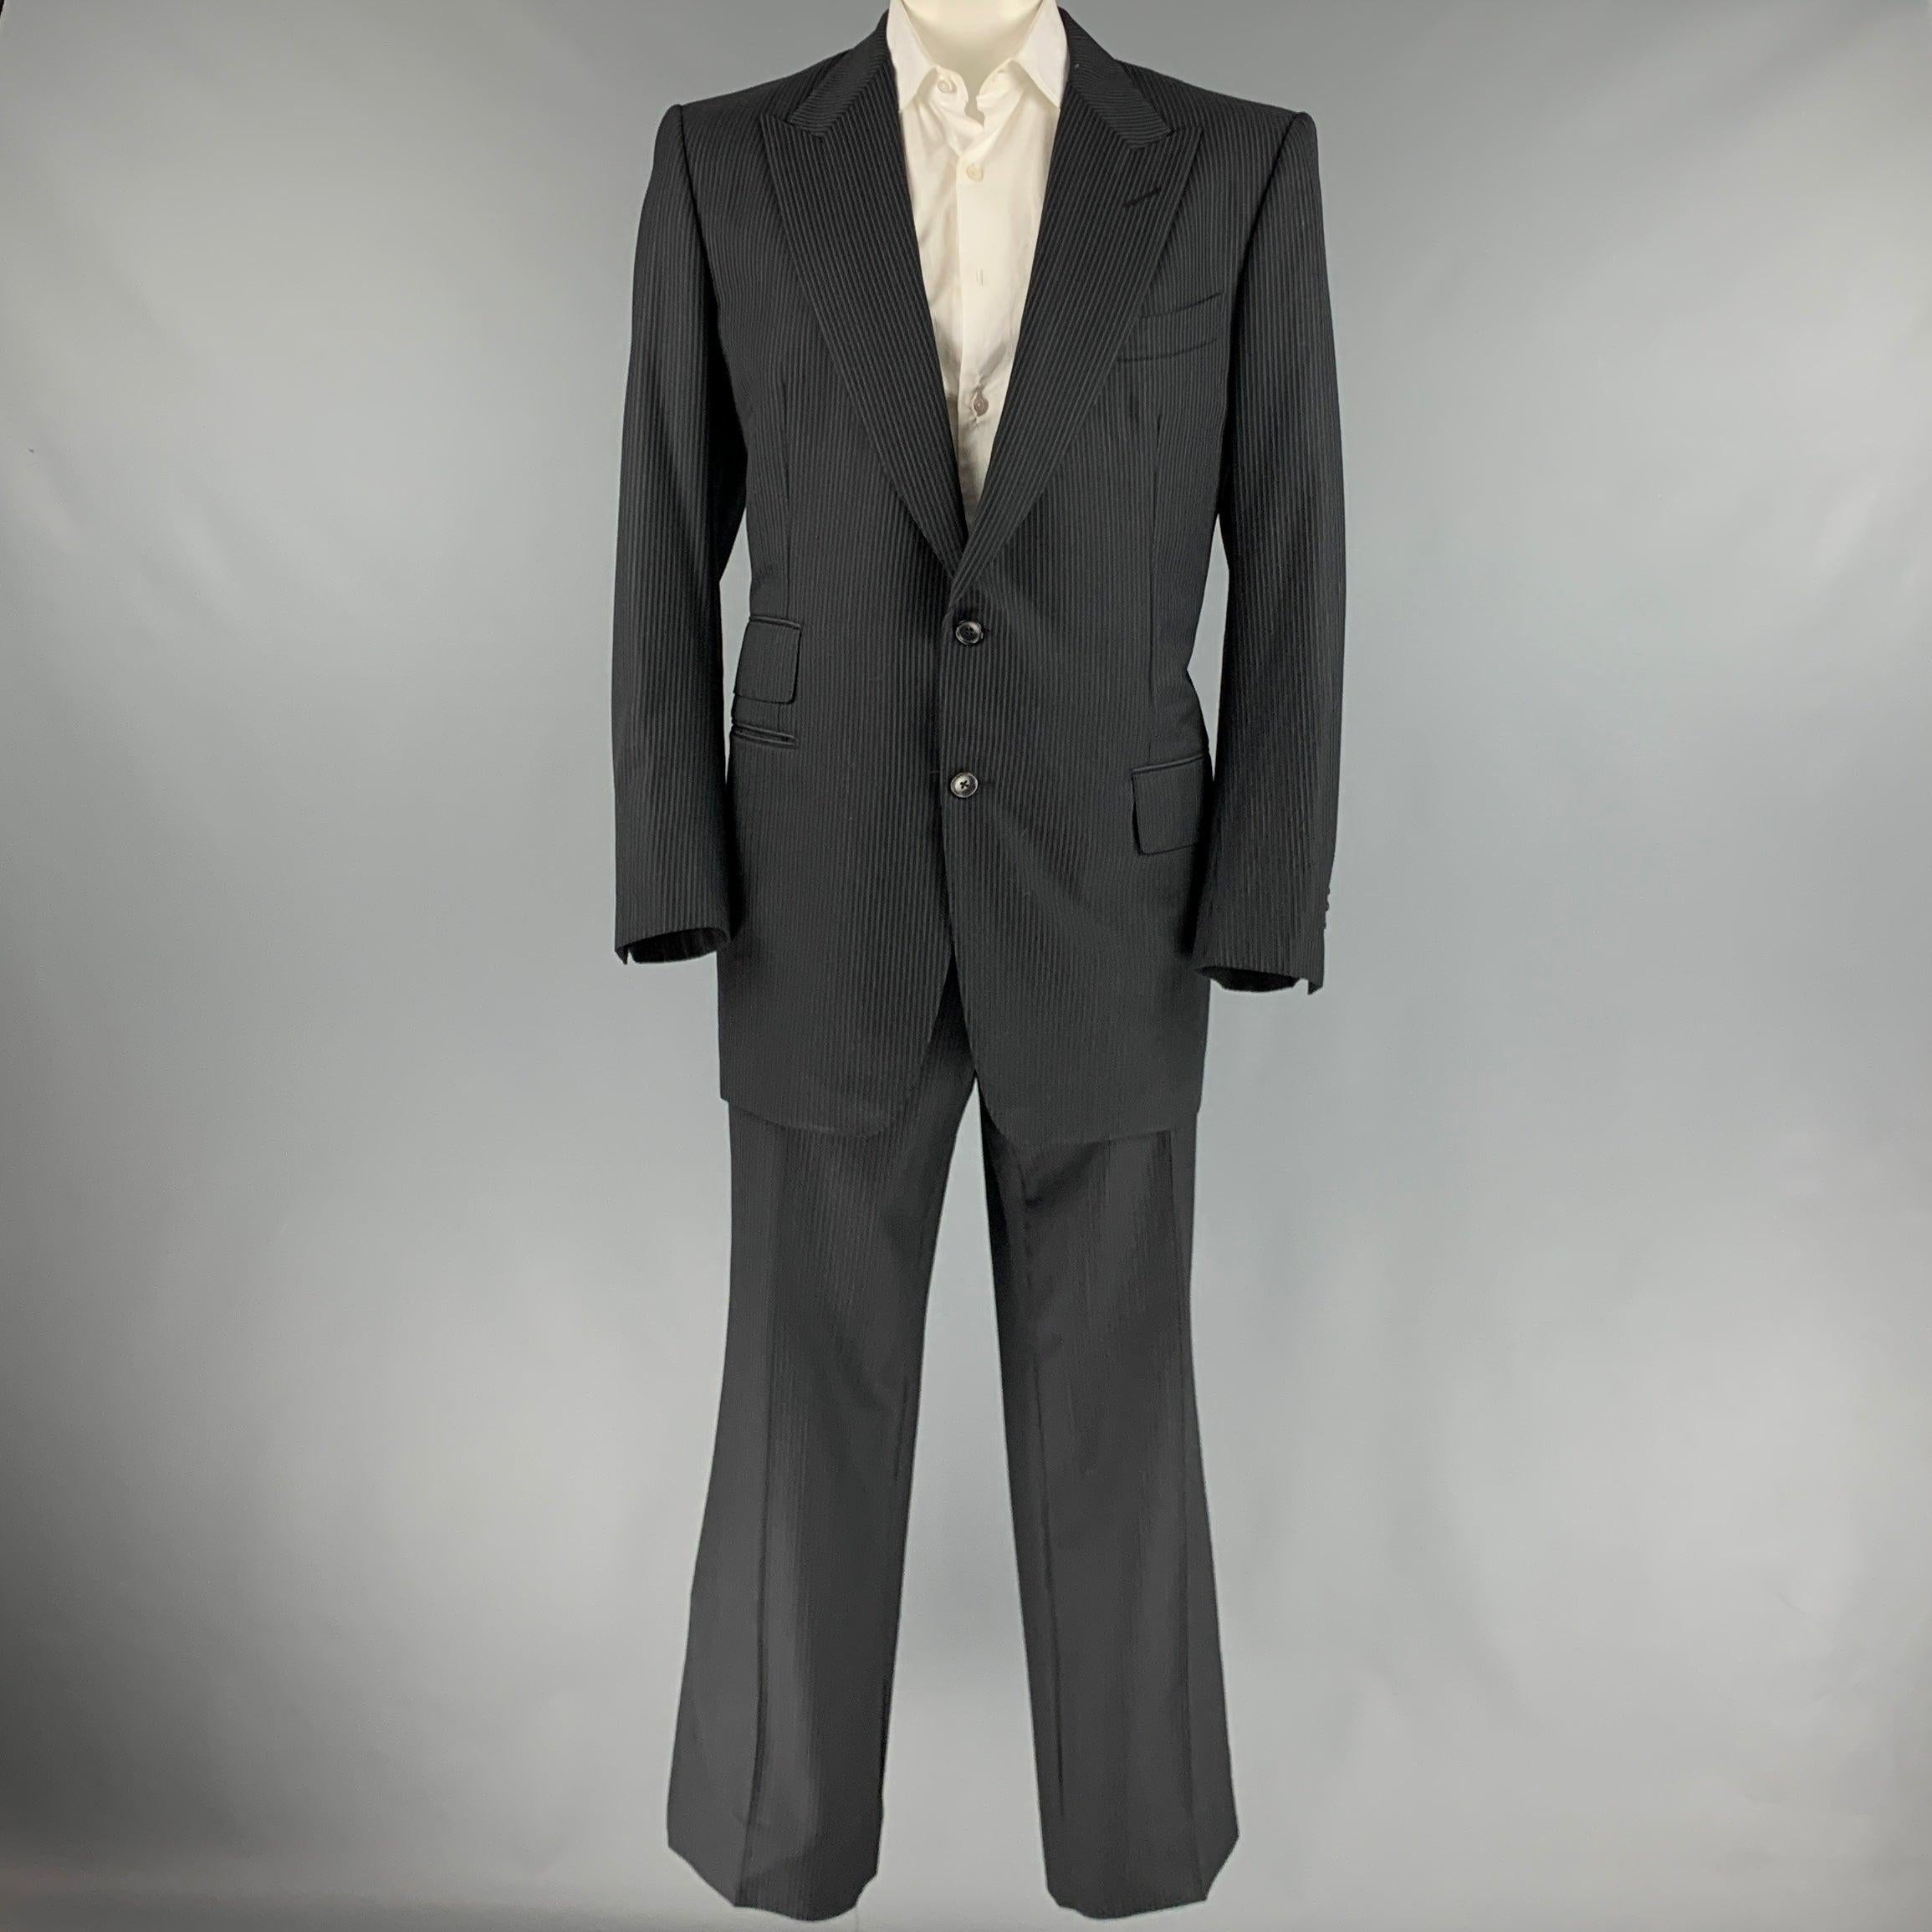 TOM FORD suit
in a black and grey pinstripe wool with a full liner and includes a single breasted, double button sport coat with peak lapel and matching flat front trousers. Made in Italy.Very Good Pre-Owned Condition. 

Marked:   58L